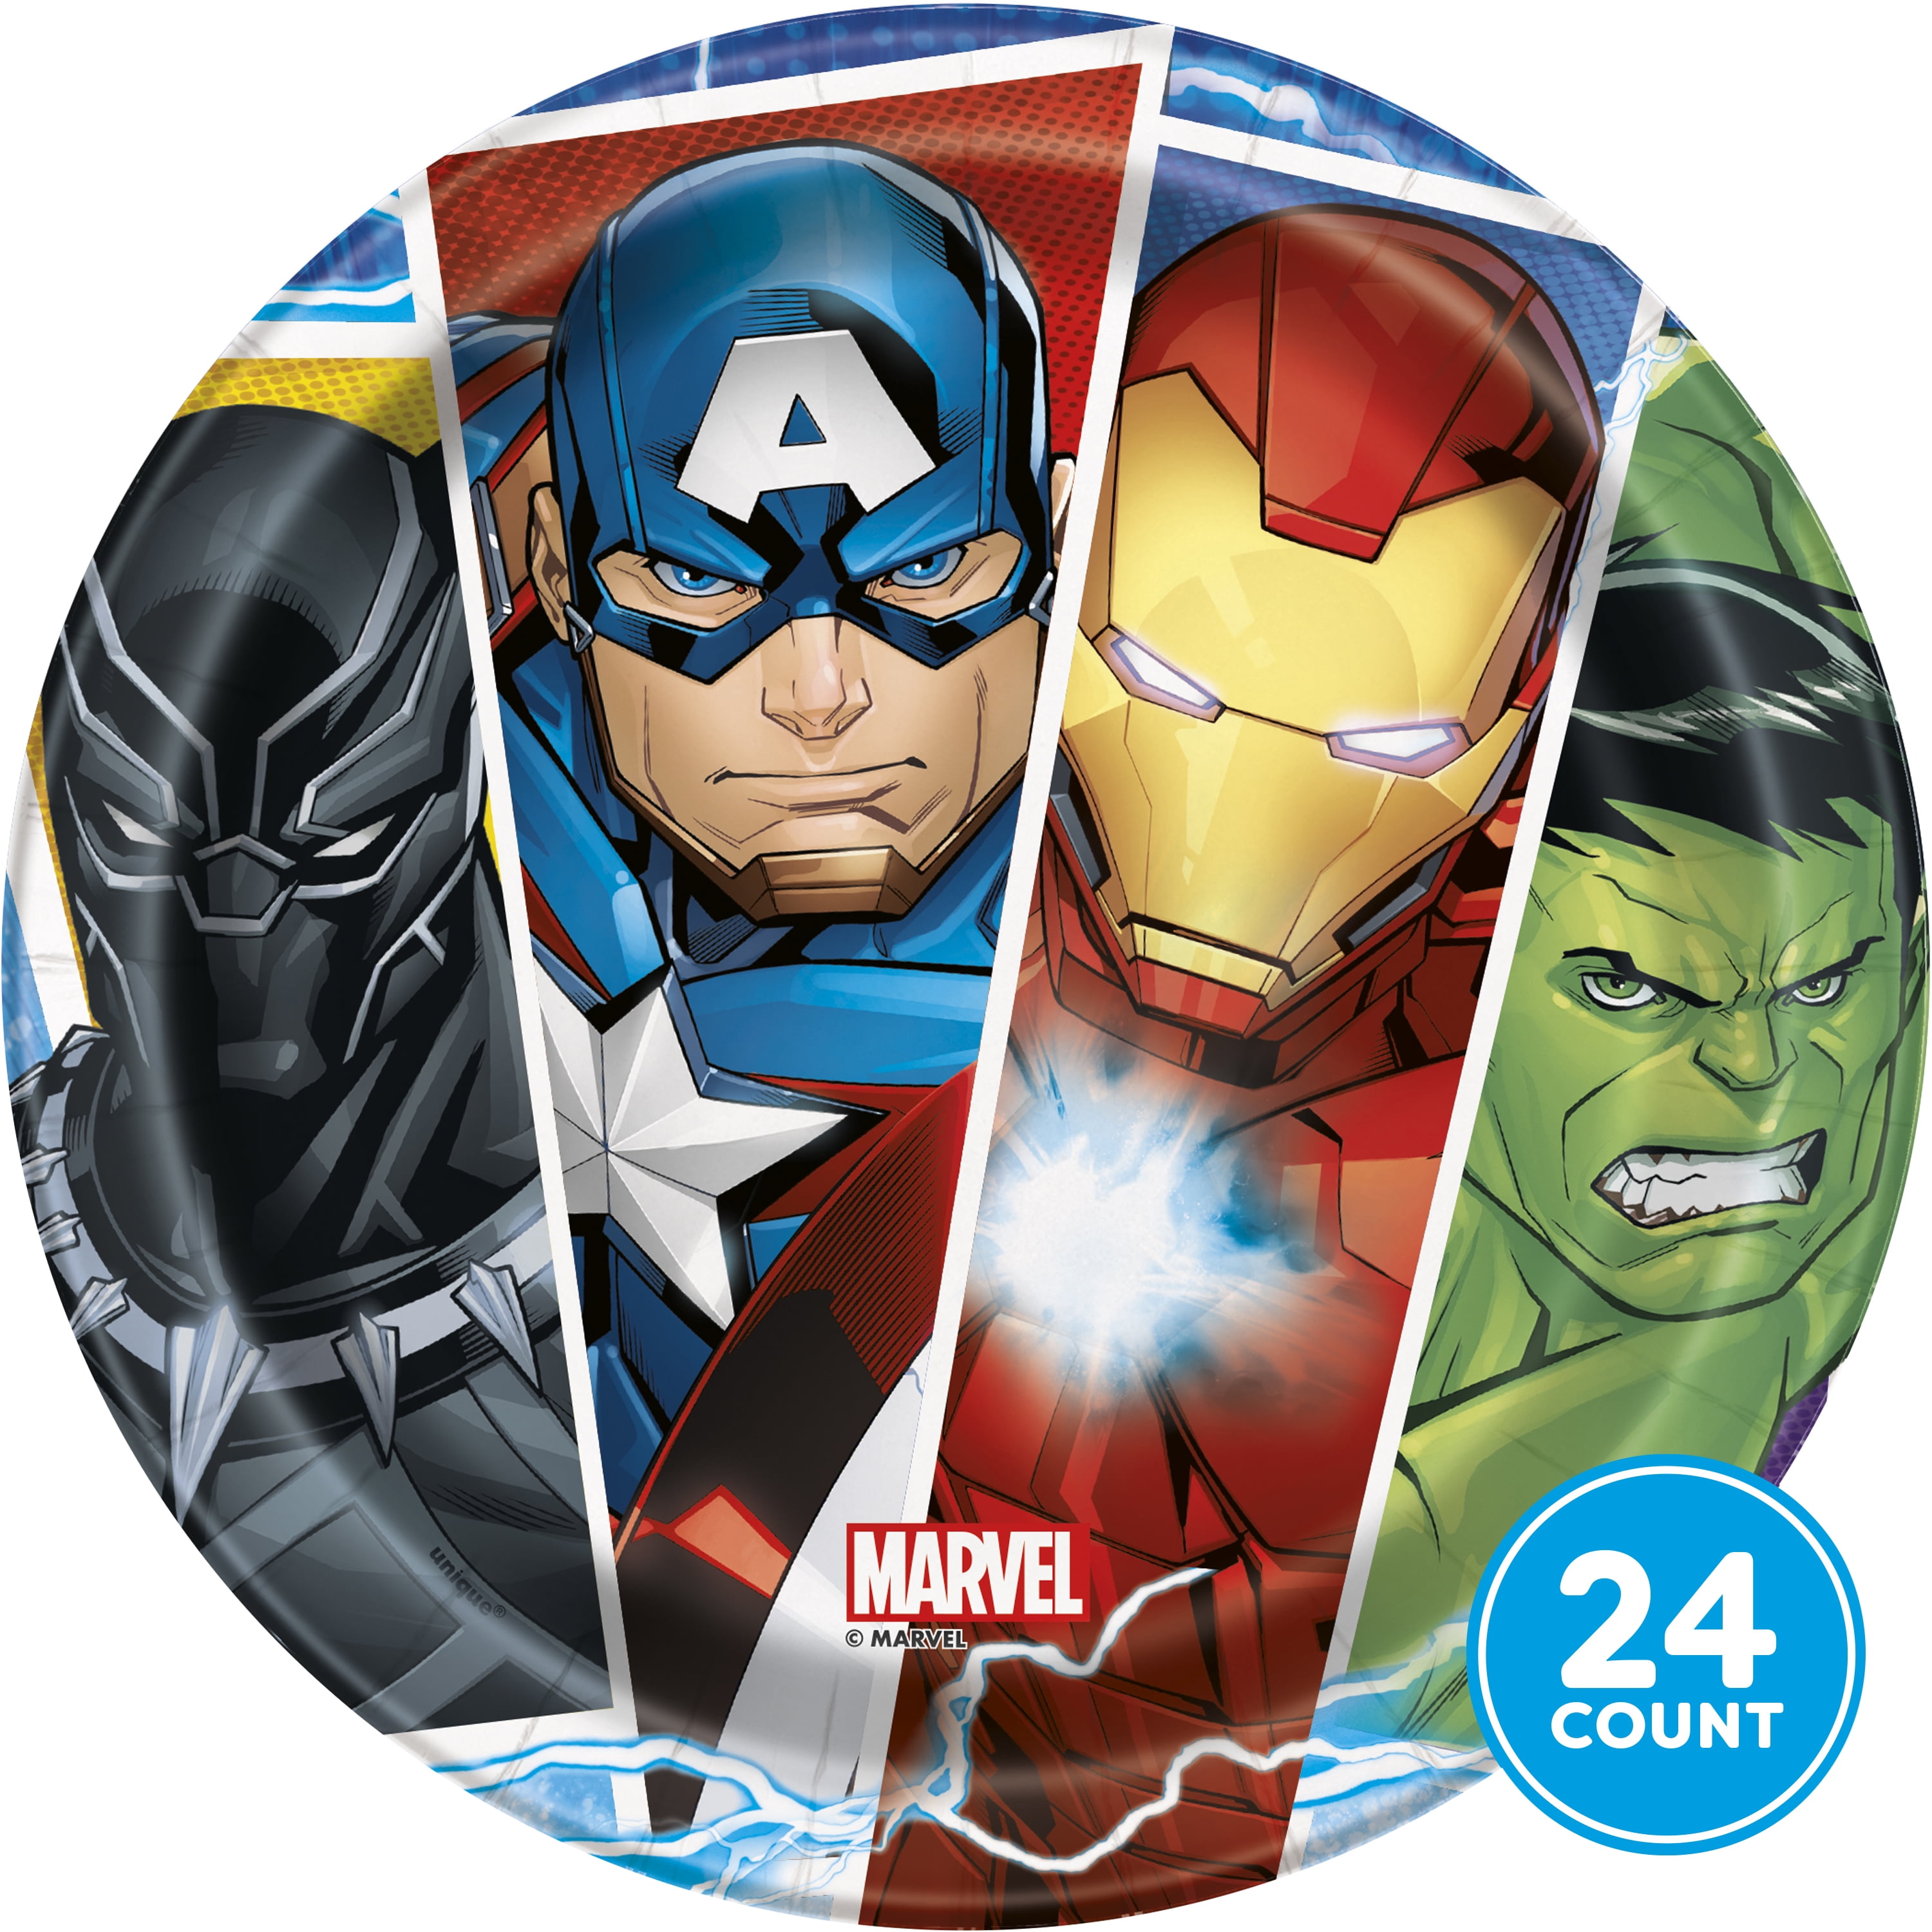 Cups Table Cover Marvel Epic Avengers Party Supplies Pack Serves 16: Dessert Plates and Birthday Candles Beverage Napkins